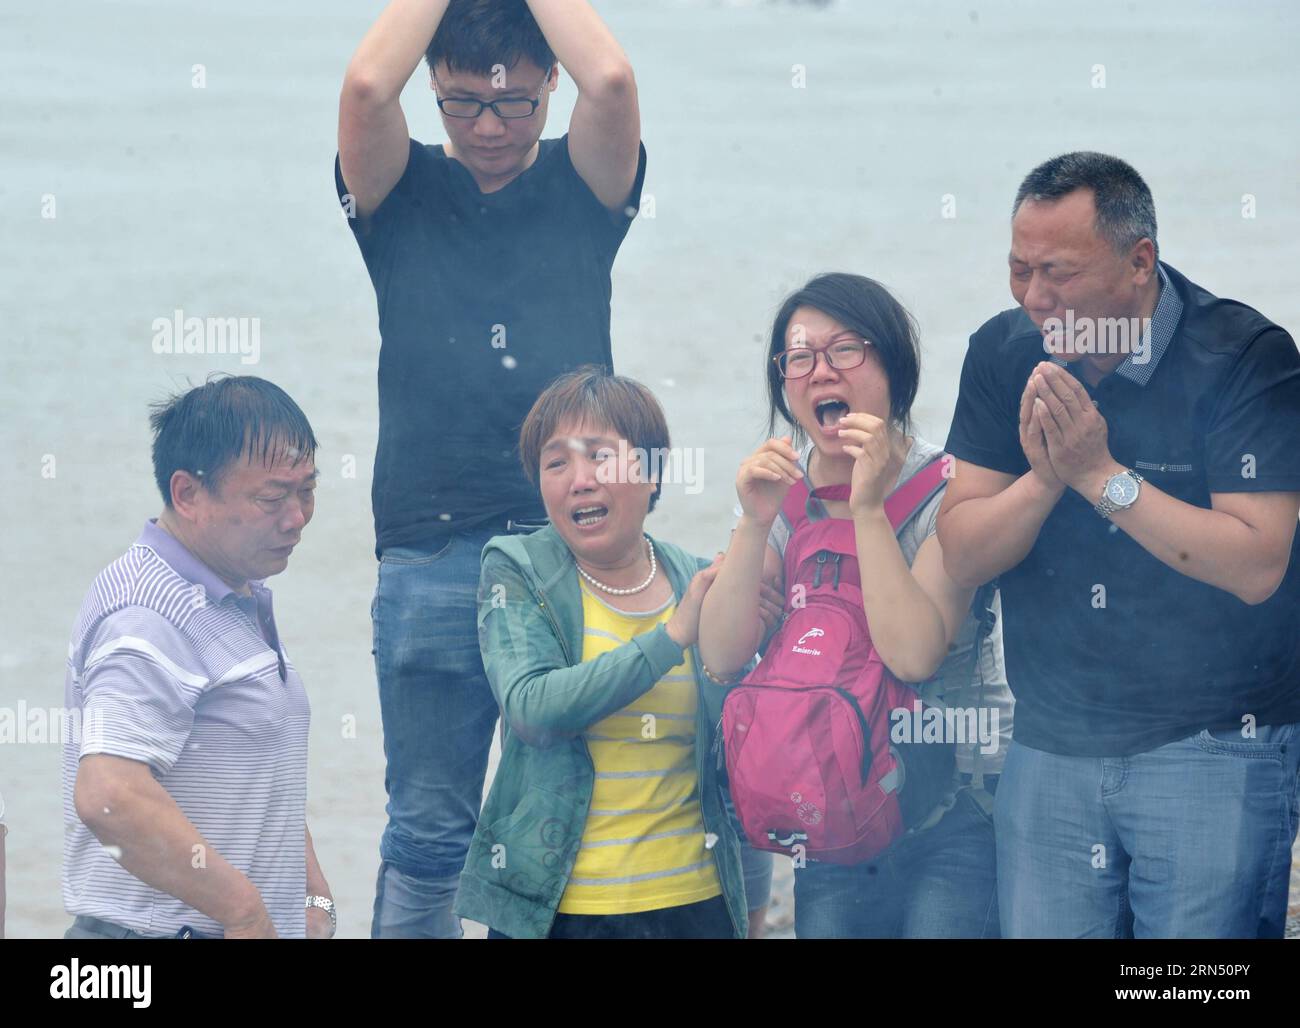 (150607) -- JIANLI, June 7, 2015 -- Relatives of the victims of the capsized ship Eastern Star mourn at the bank of the Jianli section of the Yangtze River, central China s Hubei Province, June 7, 2015. Hundreds of people gathered in the drizzle to mourn the victims of the Eastern Star disaster here on Sunday, the seventh day since the ship capsized with the loss of more than 430. According to Chinese tradition, the seventh day is a key occasion to mourn the passing of the dead. ) (zkr) CHINA-JIANLI-CAPSIZED SHIP-MOURNING(CN) YuxGuoqing PUBLICATIONxNOTxINxCHN   Jianli June 7 2015 Relatives of Stock Photo